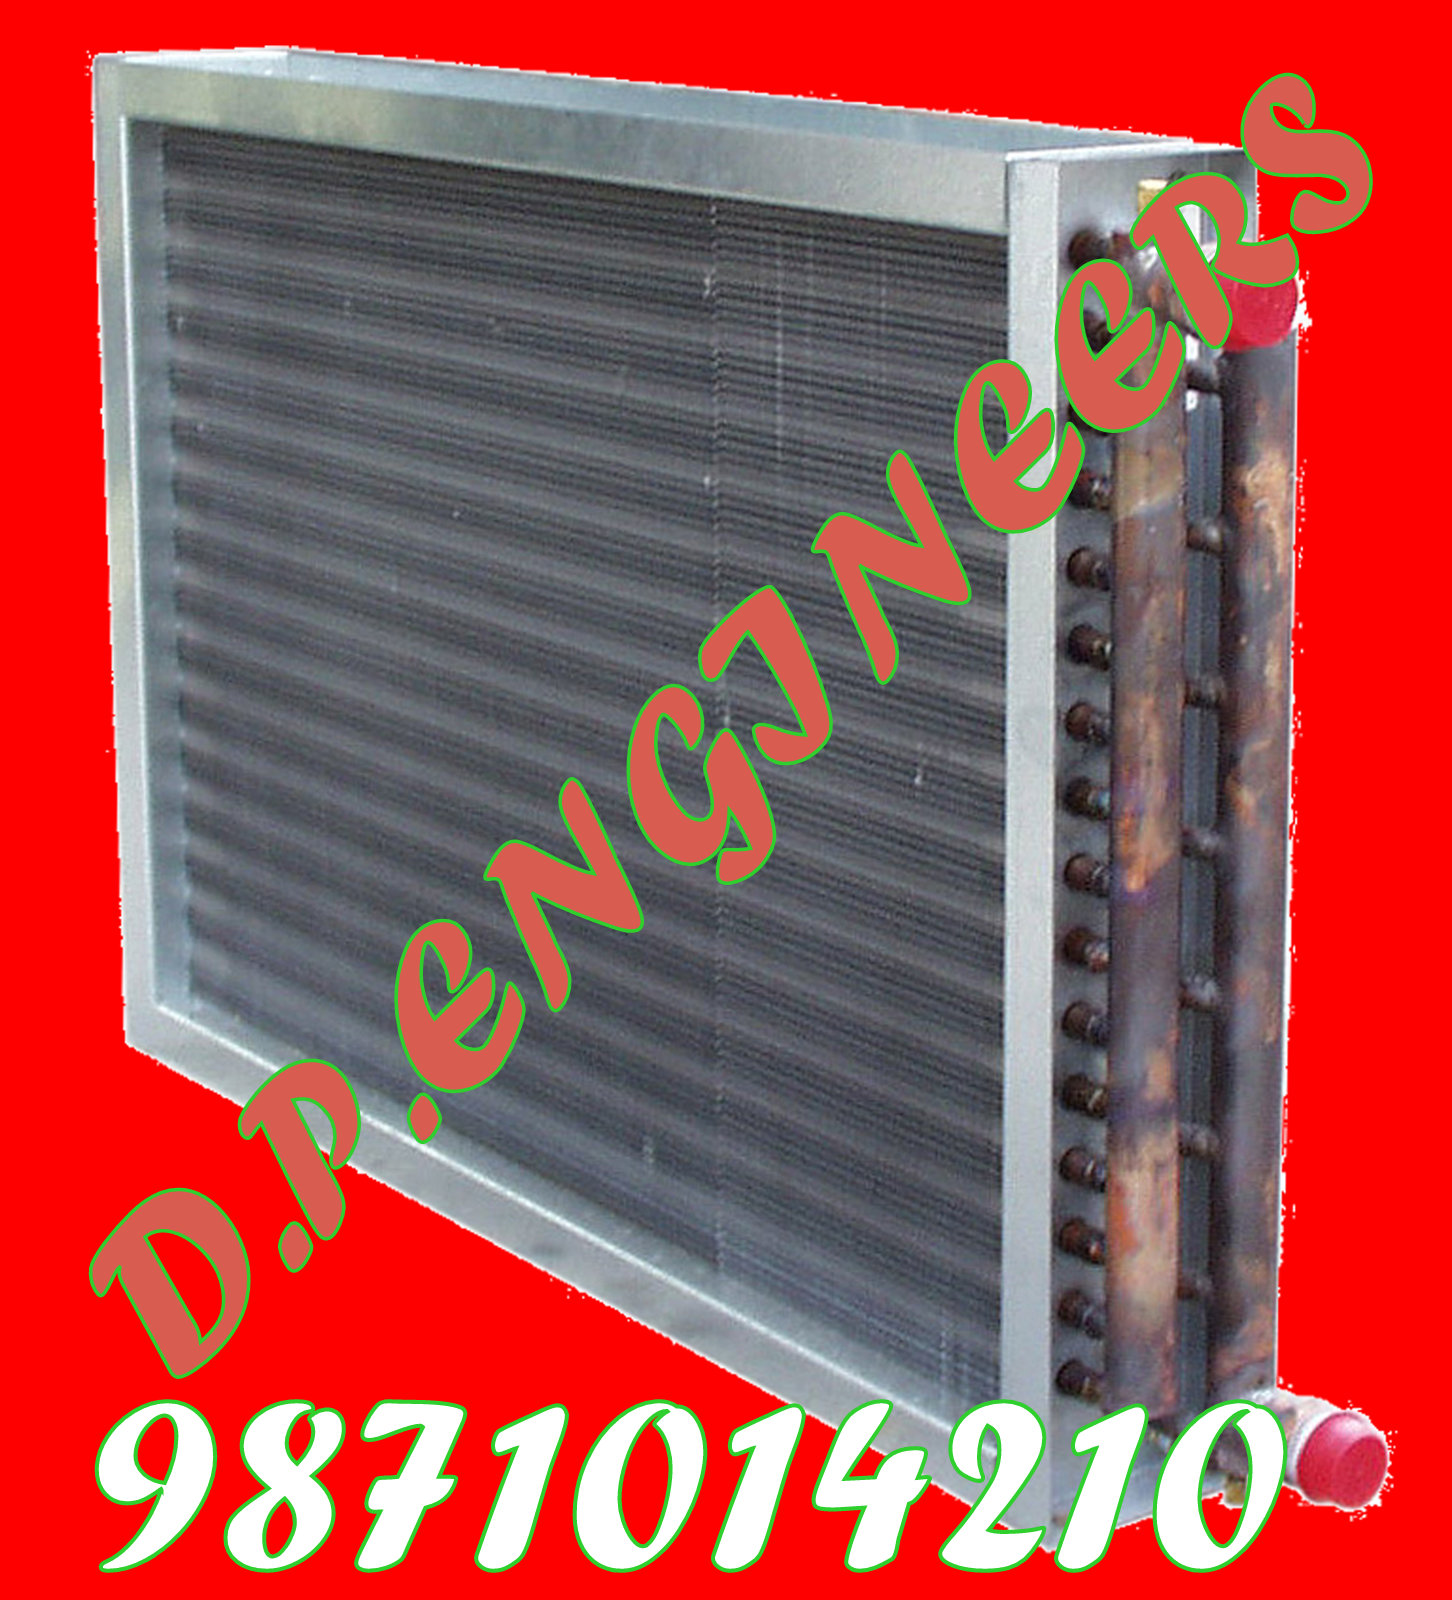 Hot Water Coils Manufacturer Supplier Wholesale Exporter Importer Buyer Trader Retailer in NR. Aggarwal Sweet Delhi India